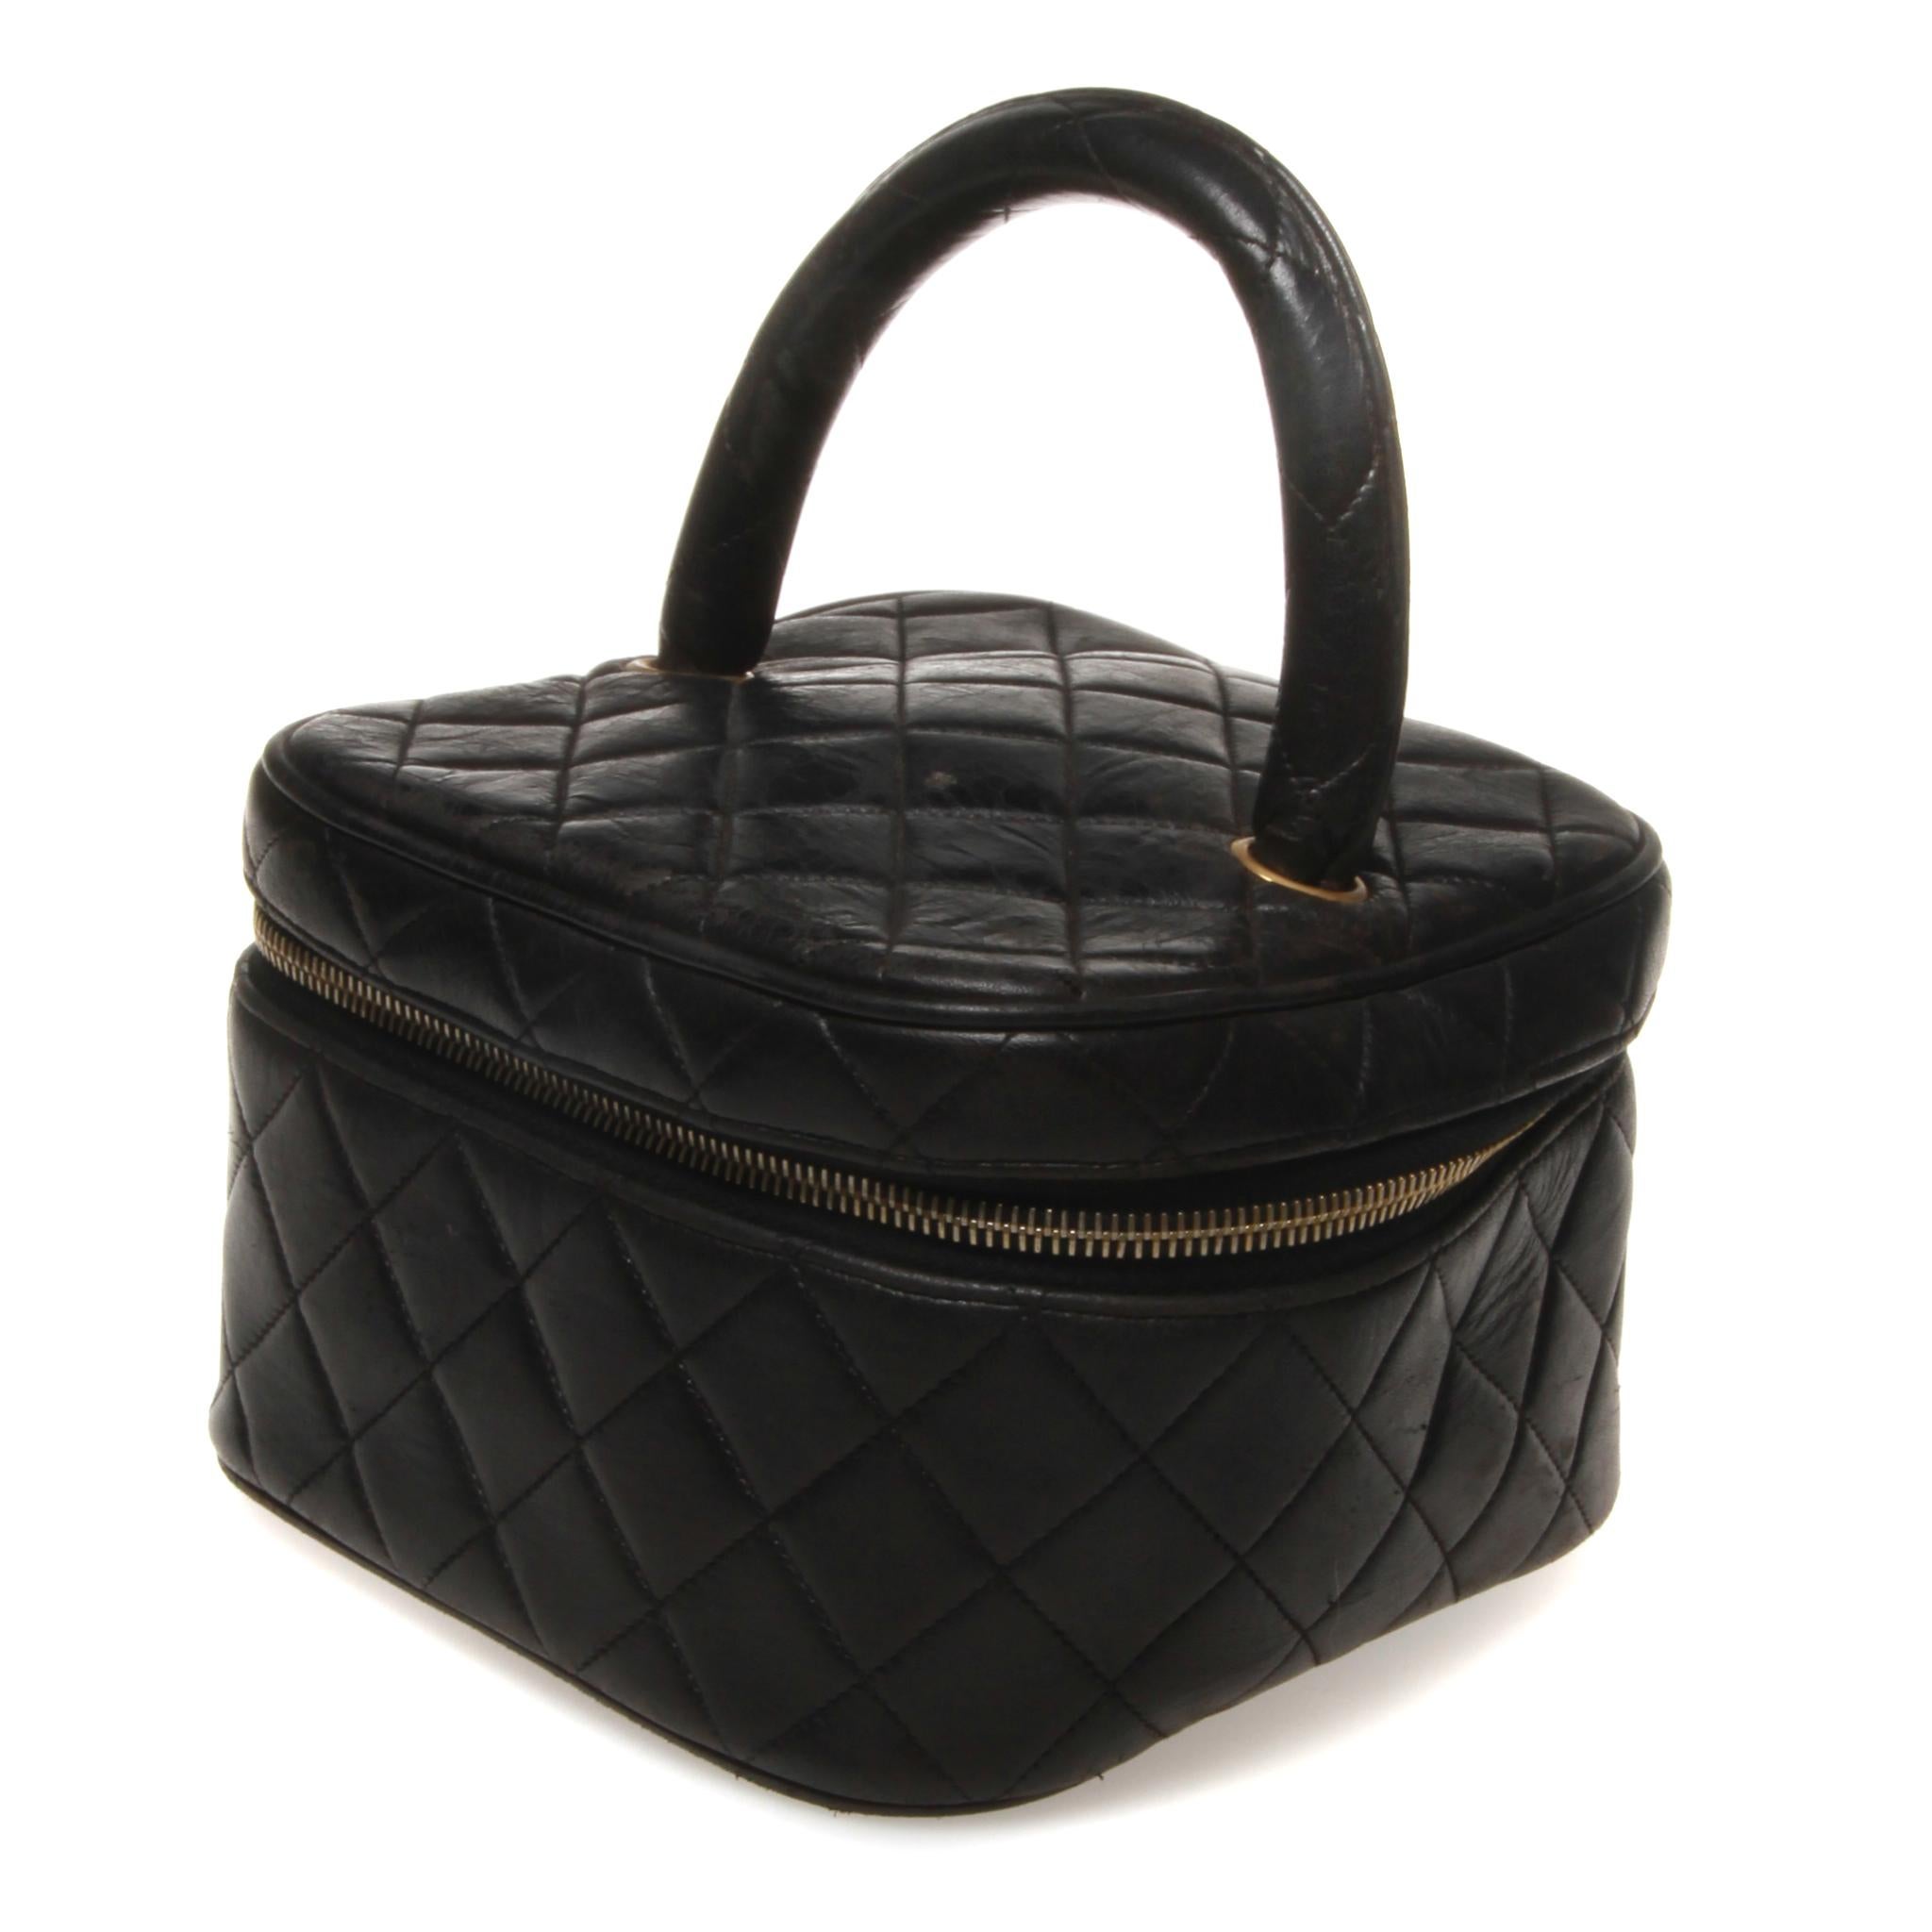 	Chanel makeup case black quilted with gold hardware